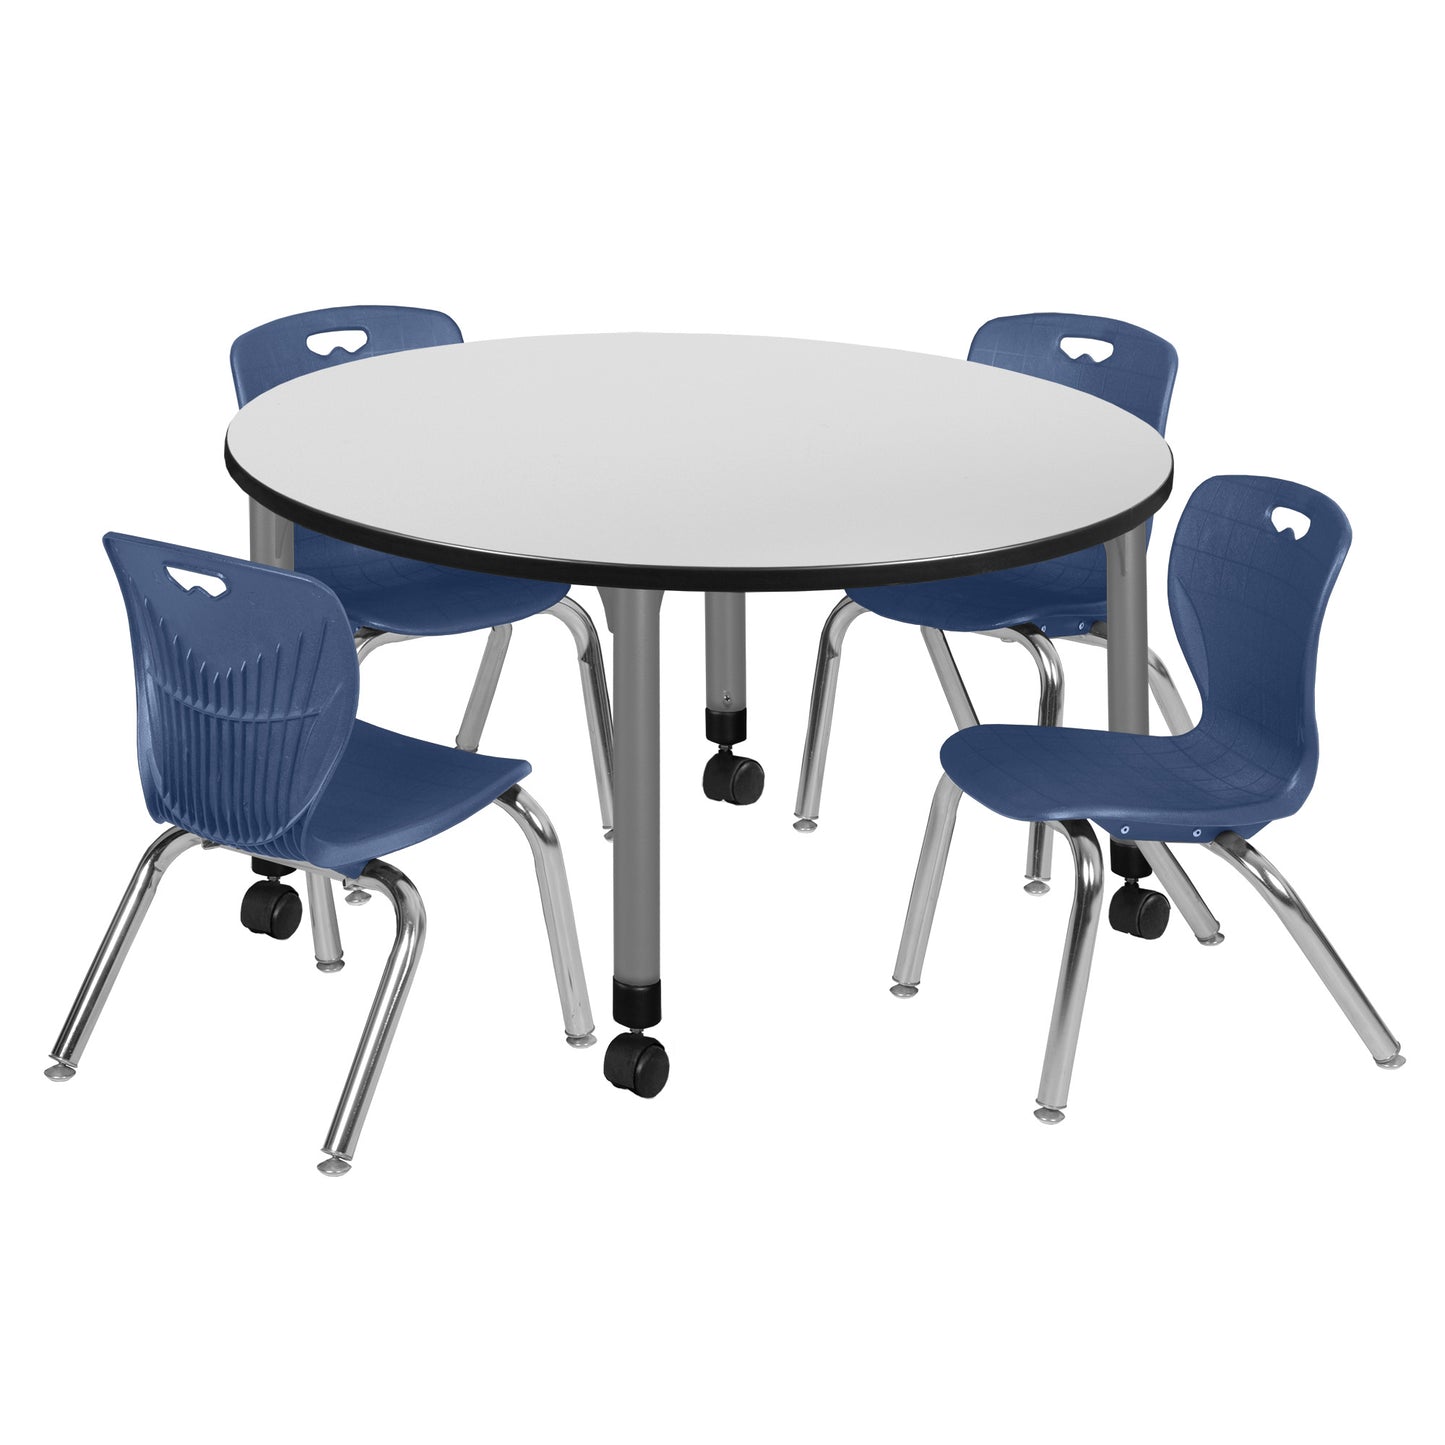 Regency Kee 48 in. Round Adjustable Classroom Table & 4 Andy 12 in. Stack Chairs